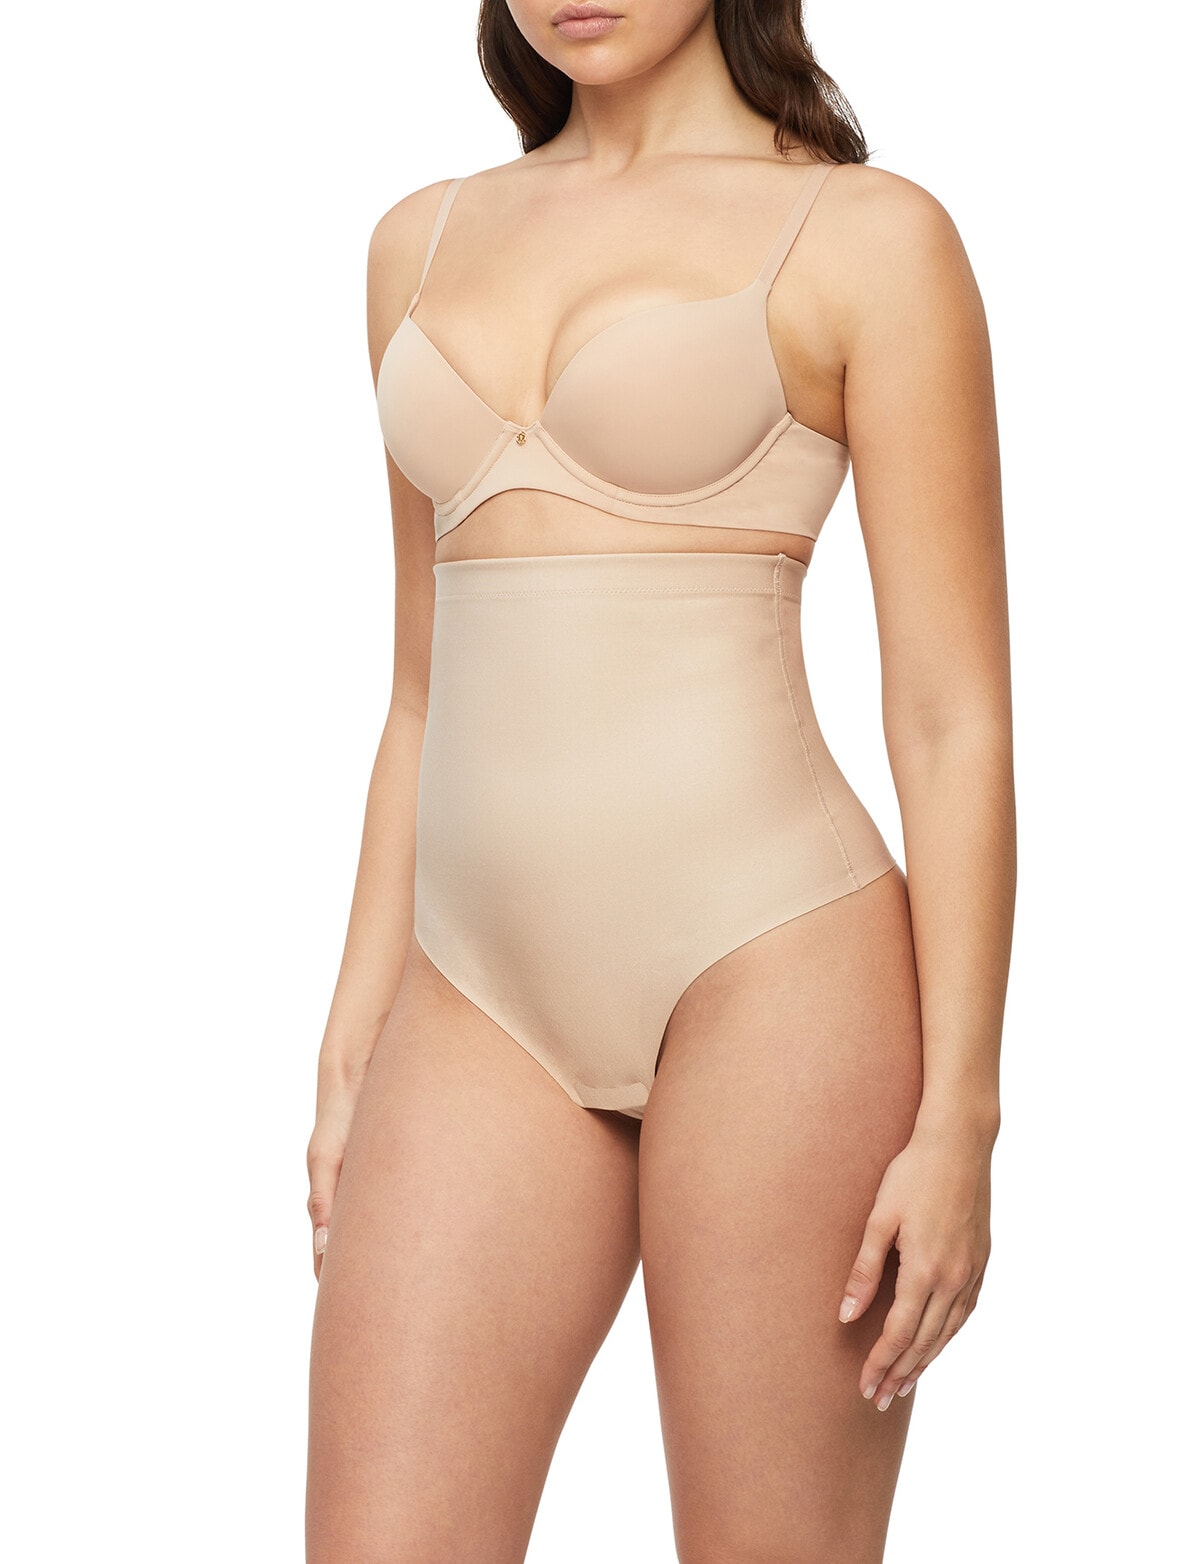 Grace's Body Shapers and Lingerie - Women's Clothing Store in Palmdale